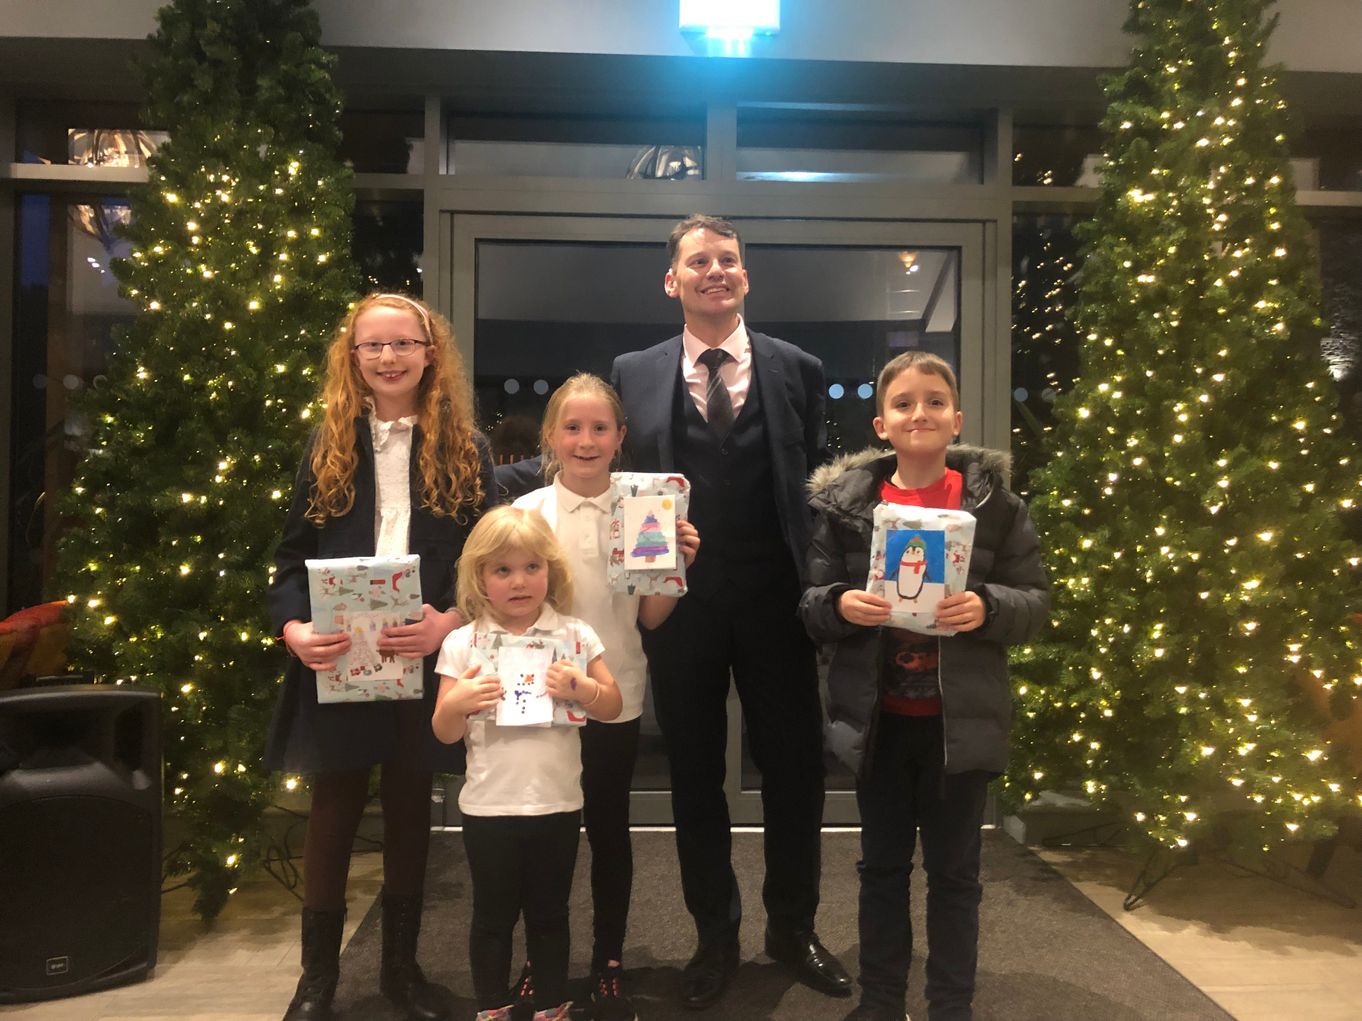 Christmas card competition winners alongside Marcell Cilliers, General Manager of the Lodore Falls Hotel & Spa